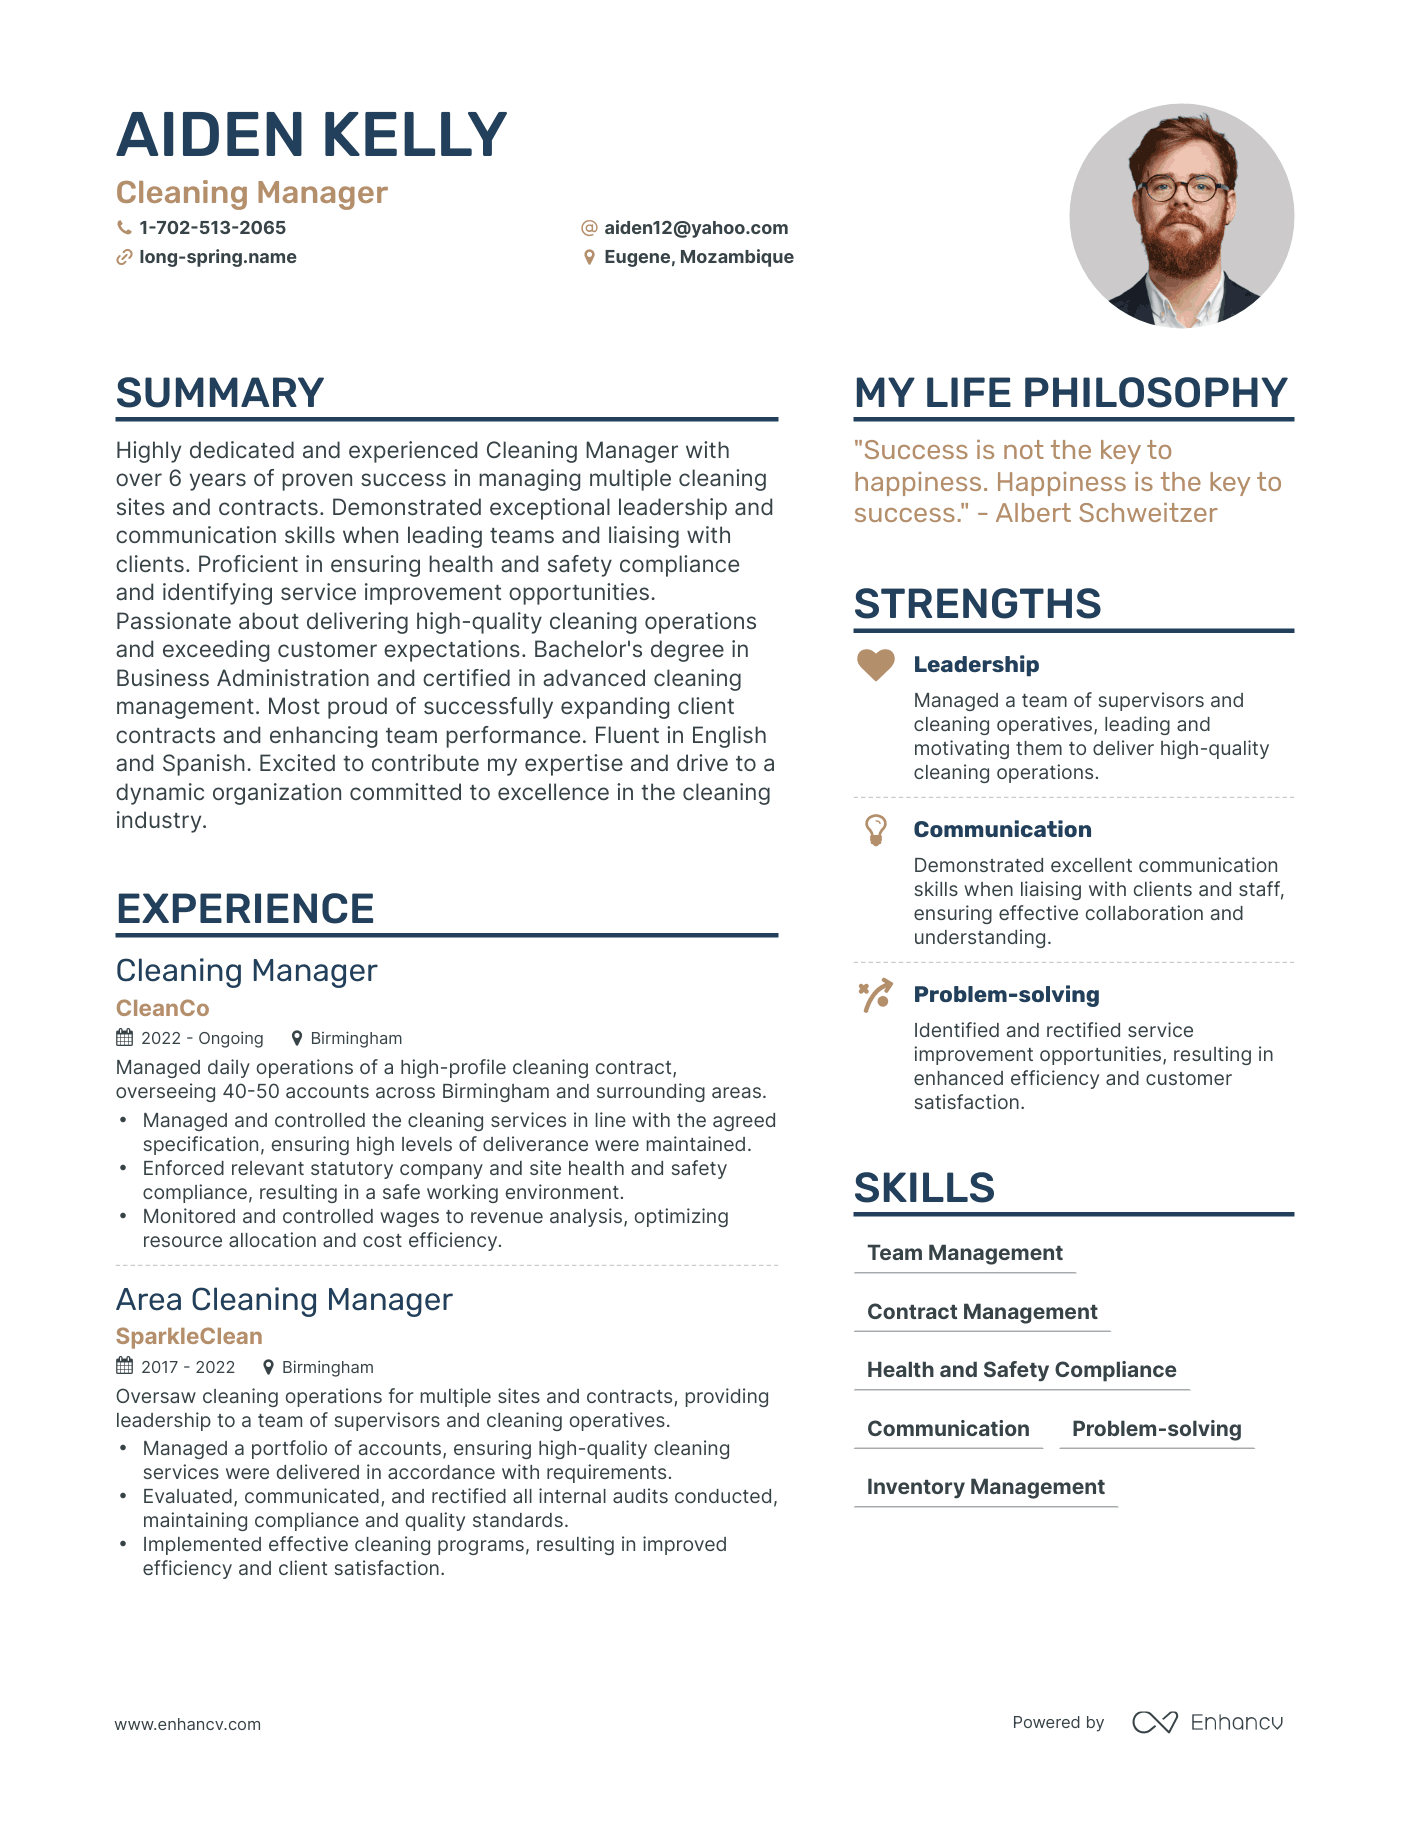 Cleaning Manager resume example